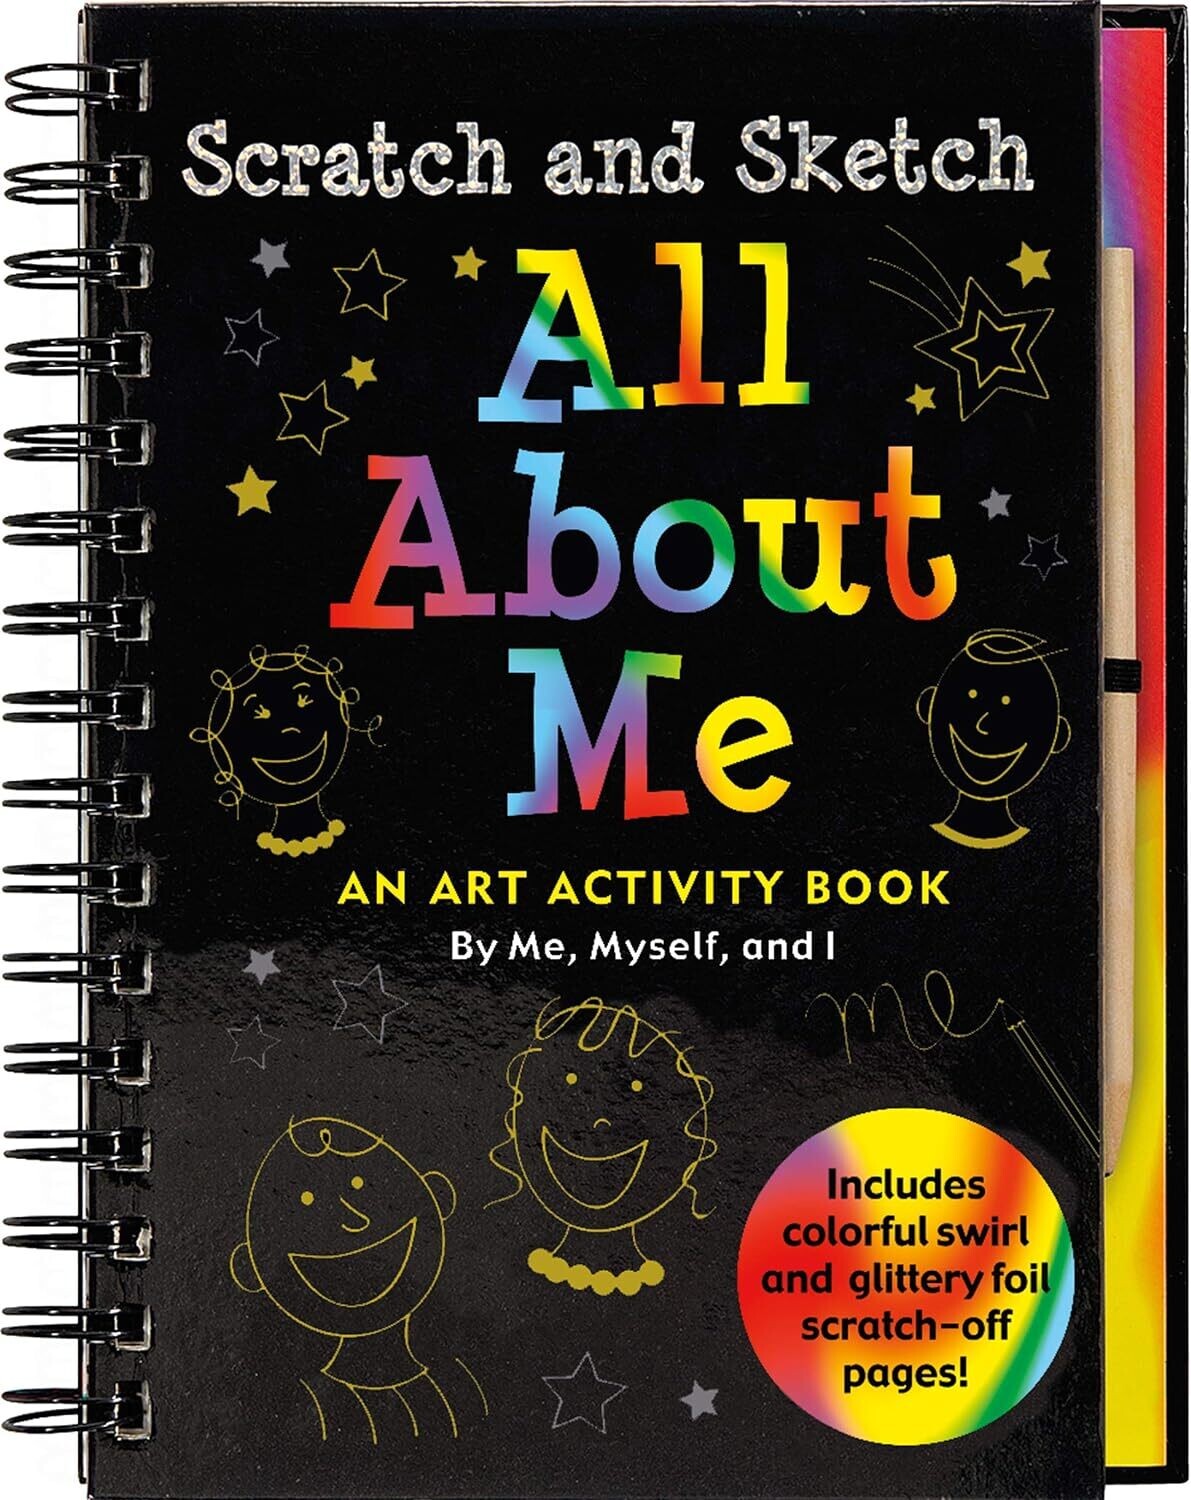 Scratch and Sketch All About Me